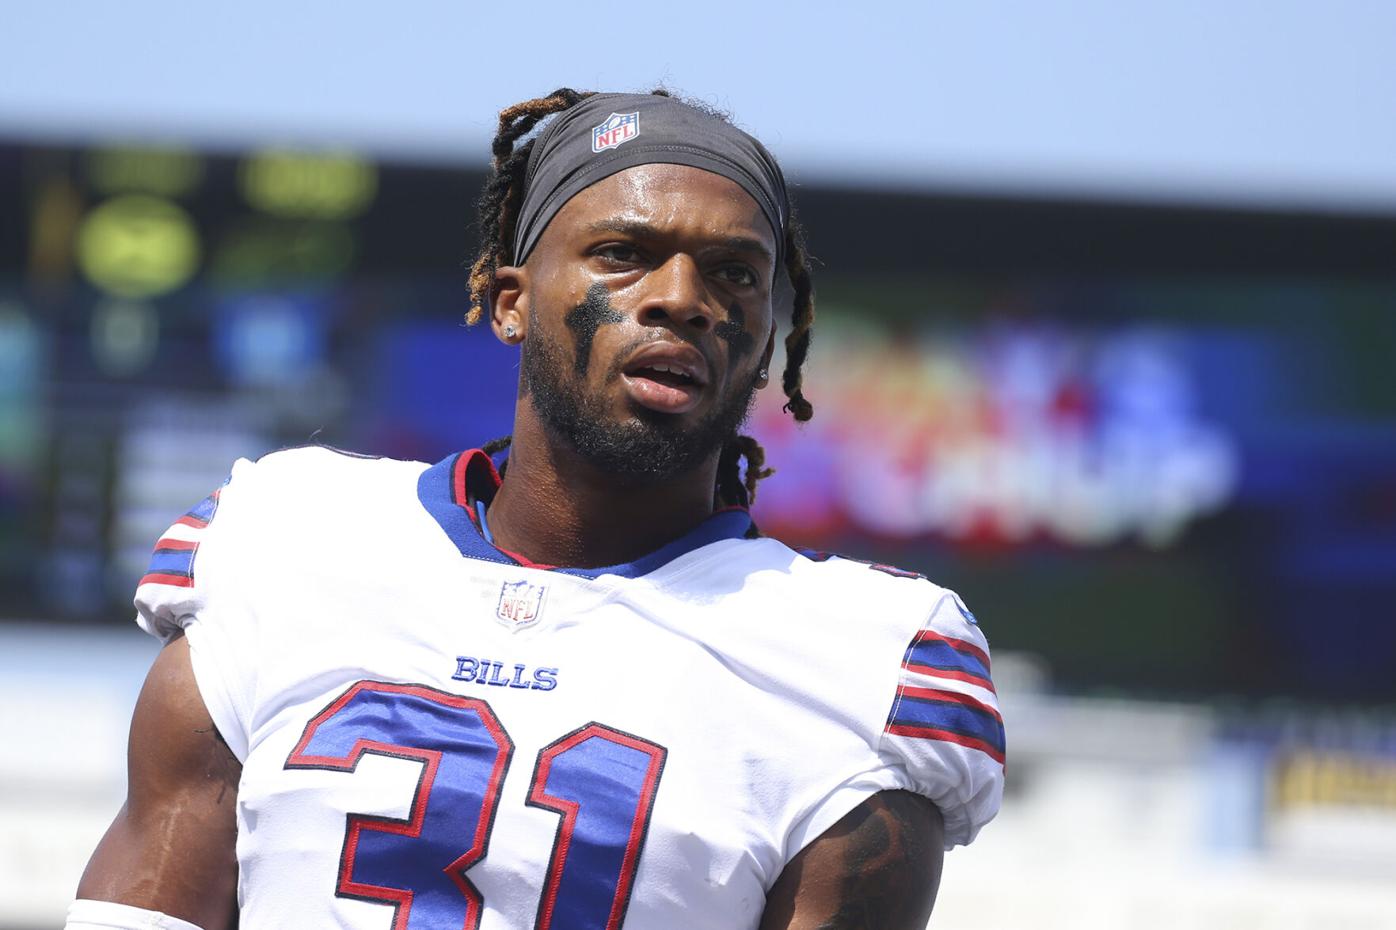 Bills' Damar Hamlin in critical condition after heart stopped